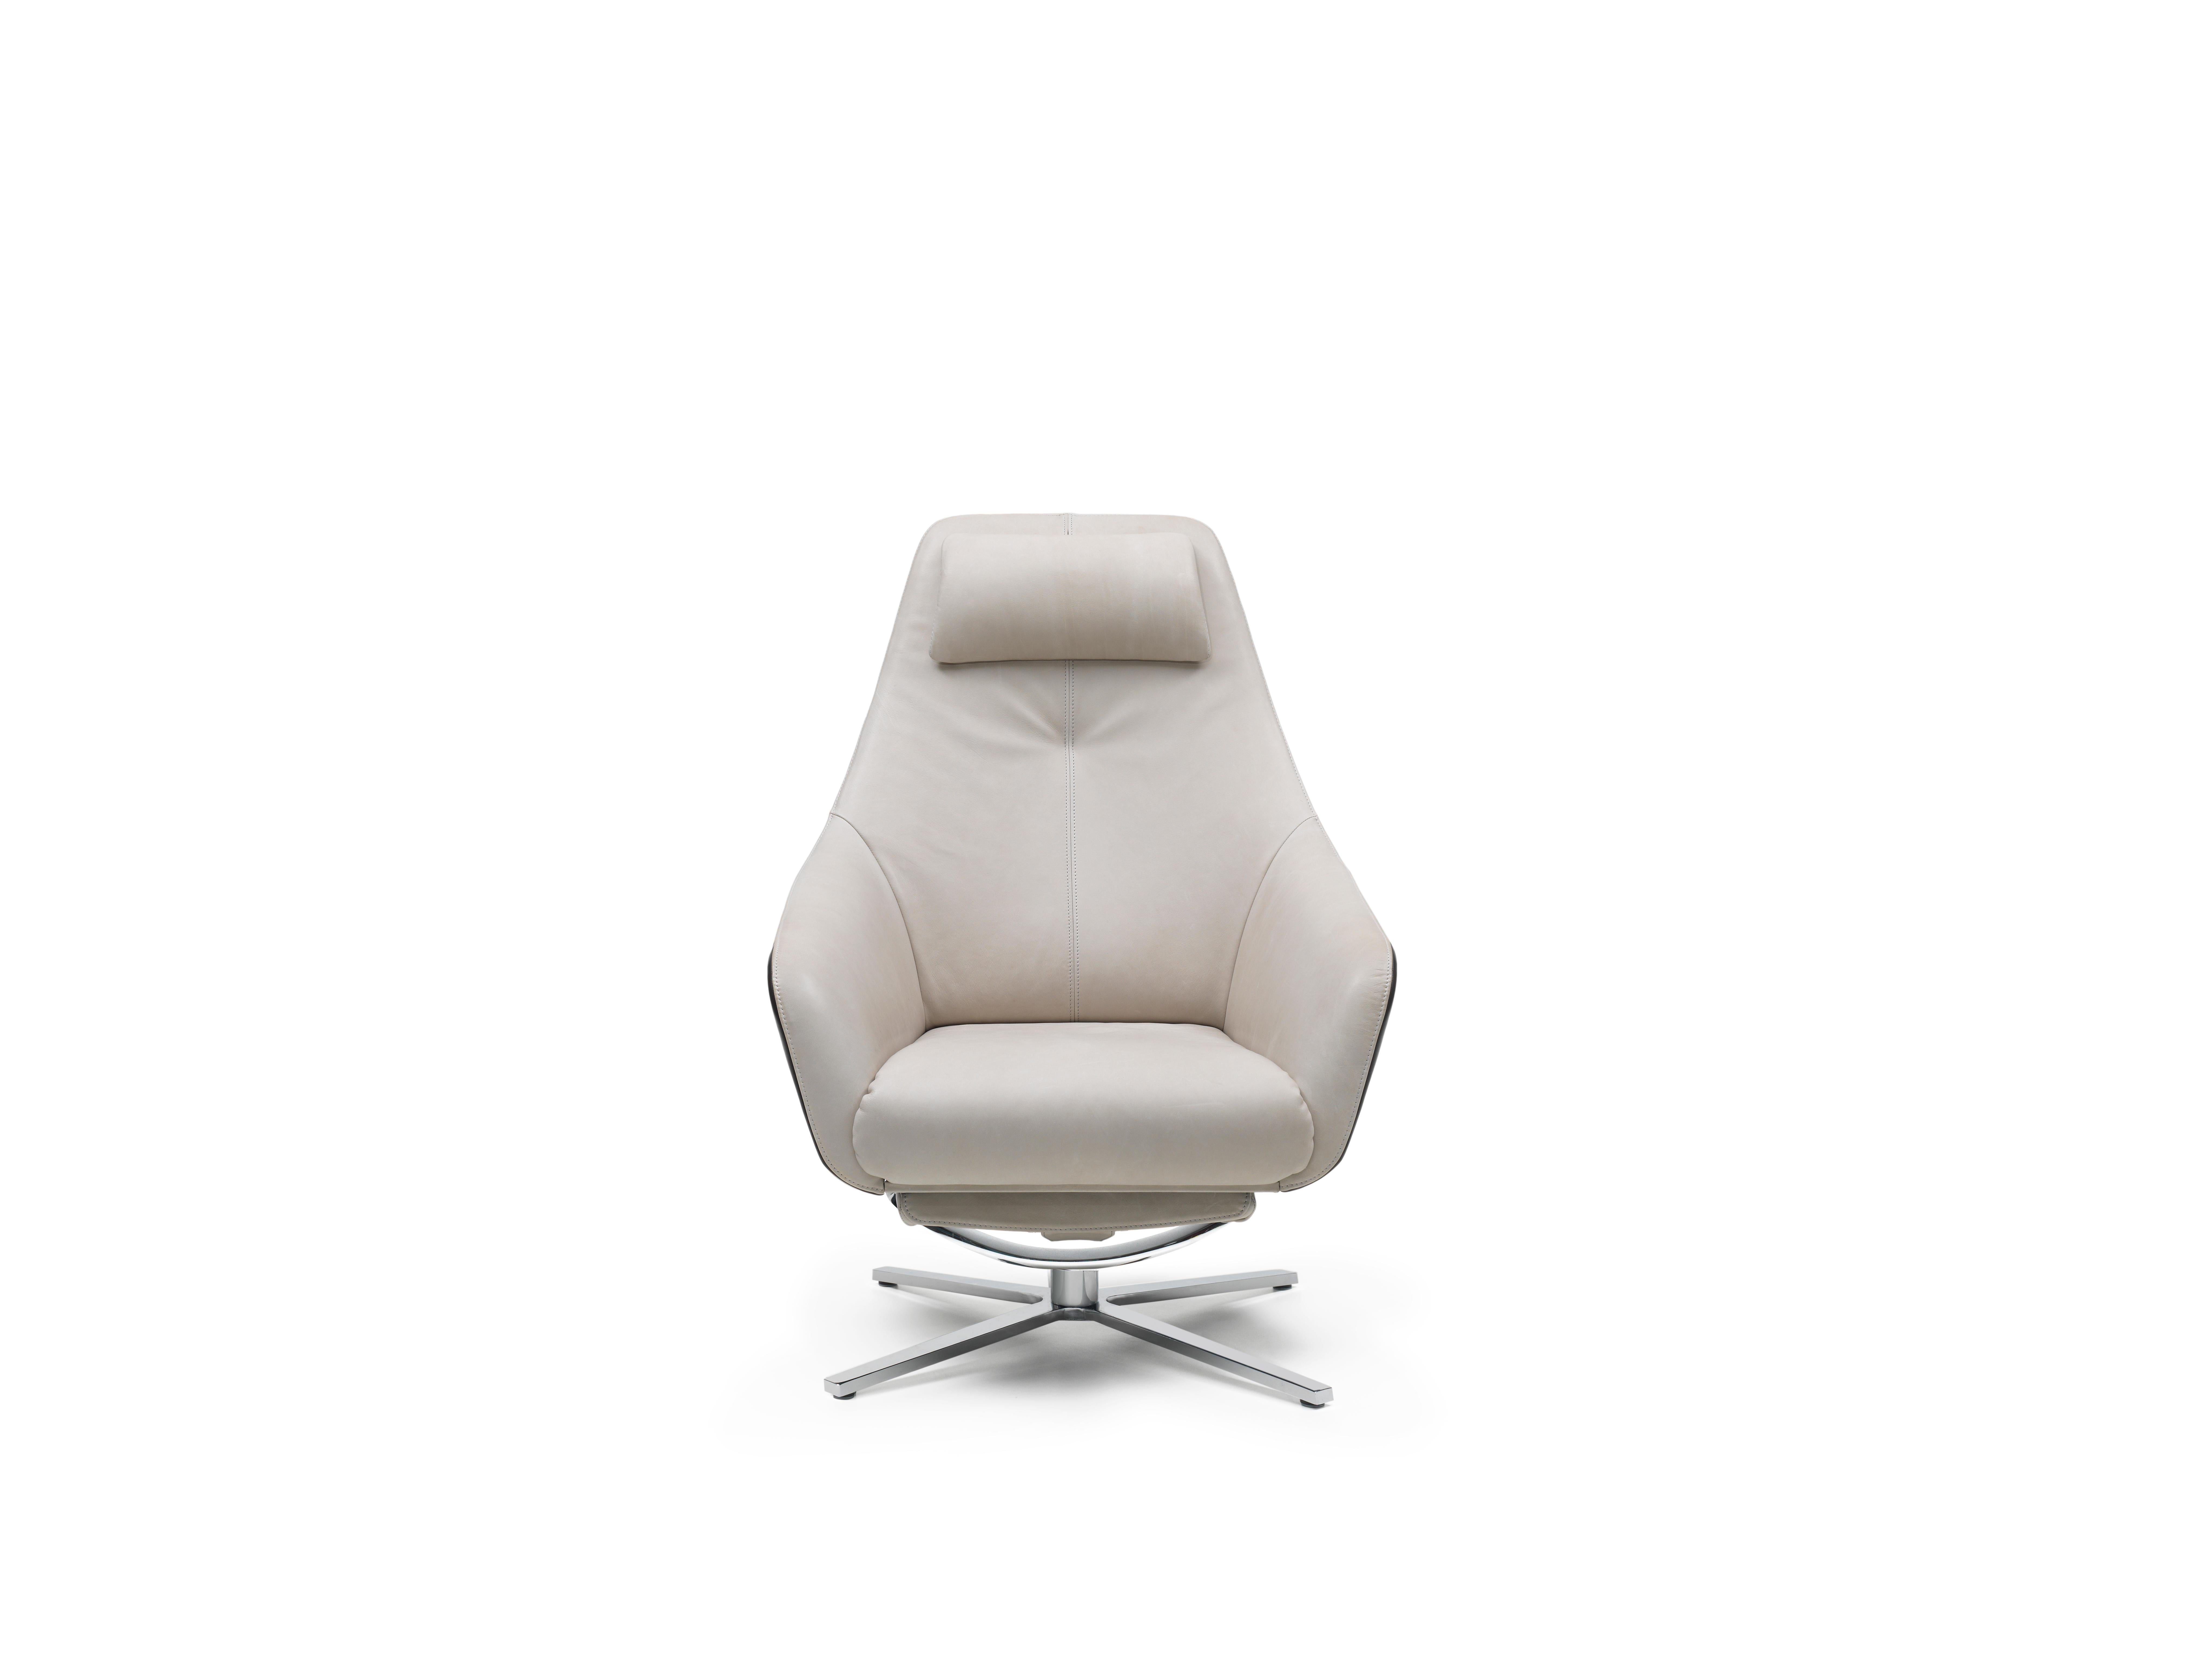 DS-277 armchair by De Sede
Dimensions: D 53 x W 44 x H 100 cm, with extension W 153
Materials: steel, leather

Prices may change according to the chosen materials and size. 

Maximum relax comfort

DS-277 is impressive for its formally exciting